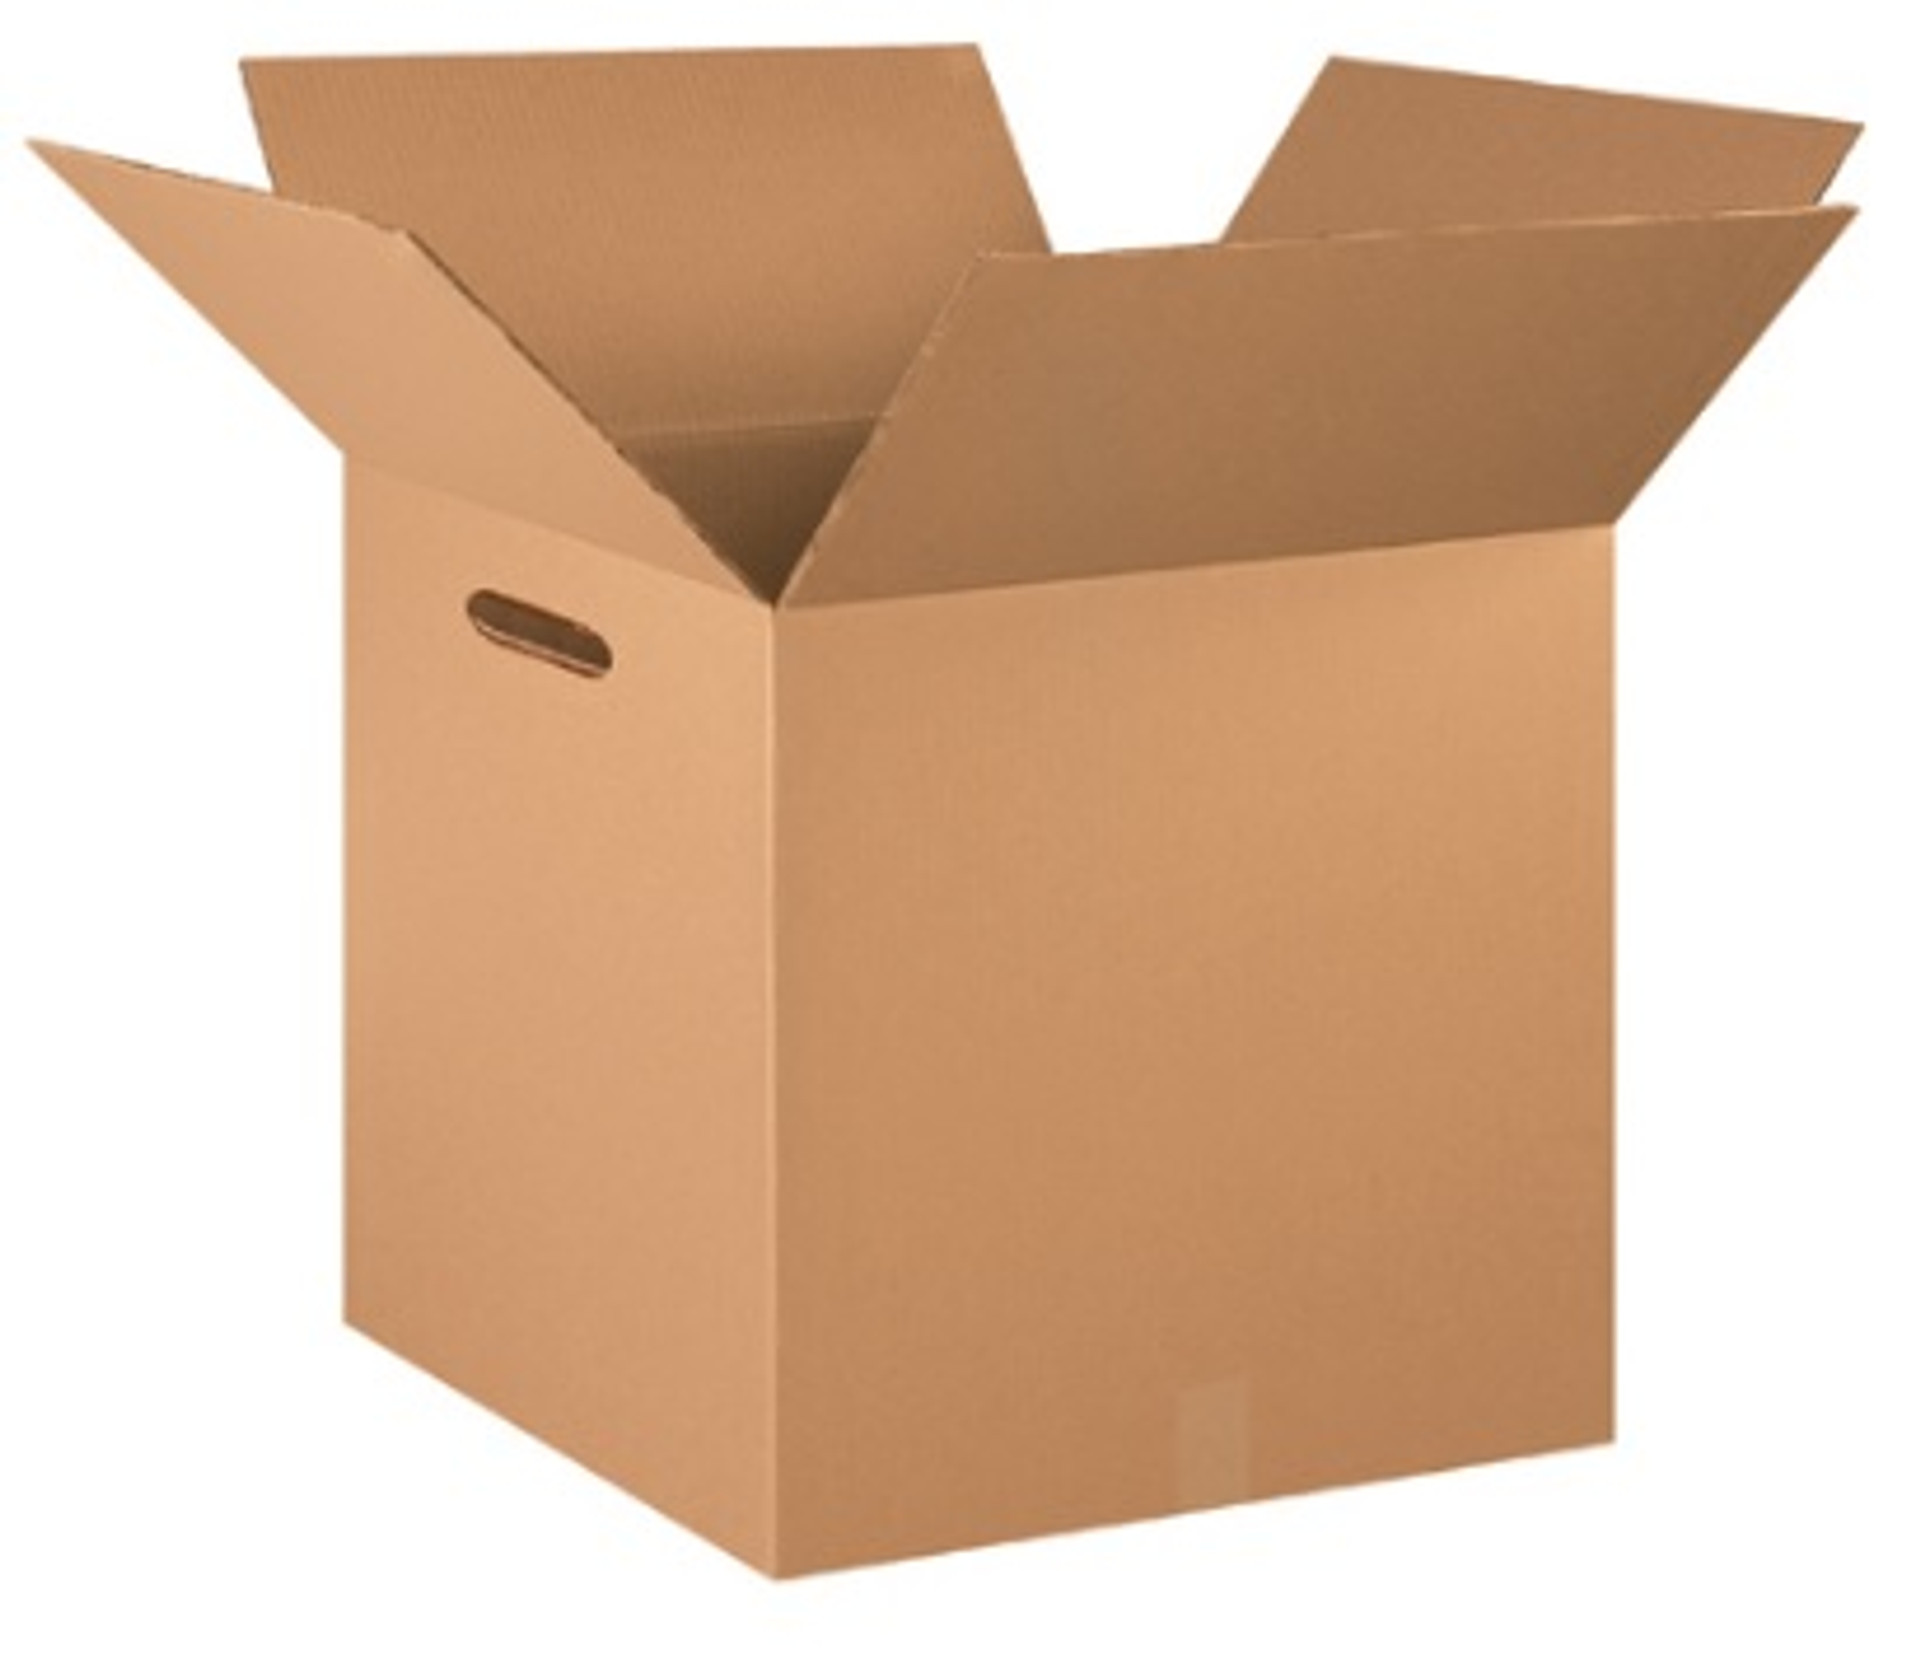 24 X 24 X 24 Double Wall Corrugated Cardboard Shipping Boxes 10bundle